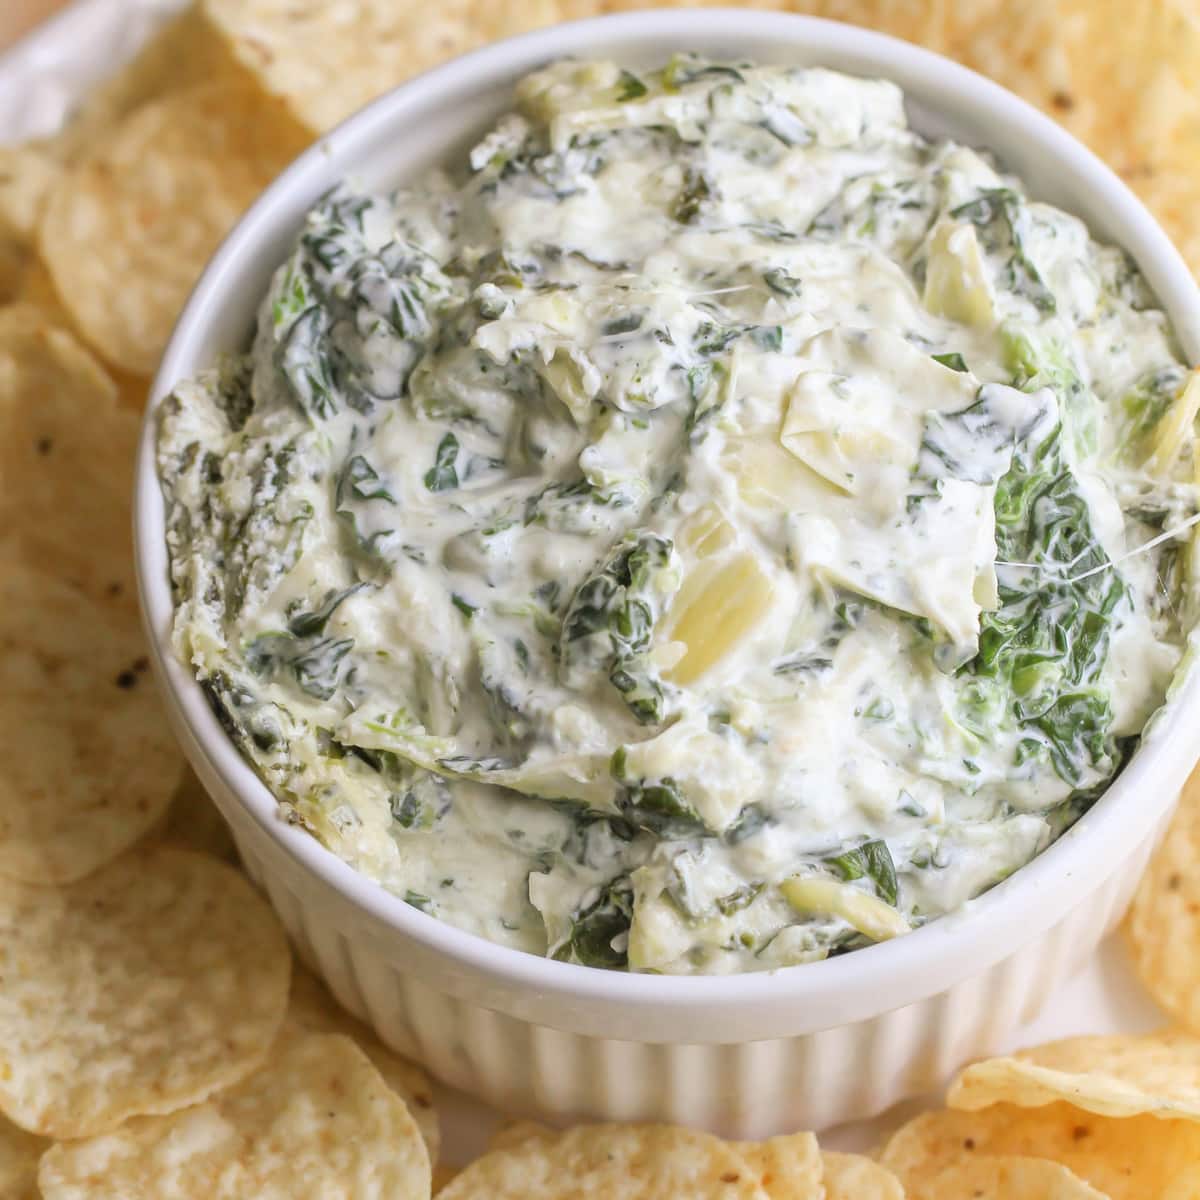 Thanksgiving appetizers - spinach artichoke dip served with chips.